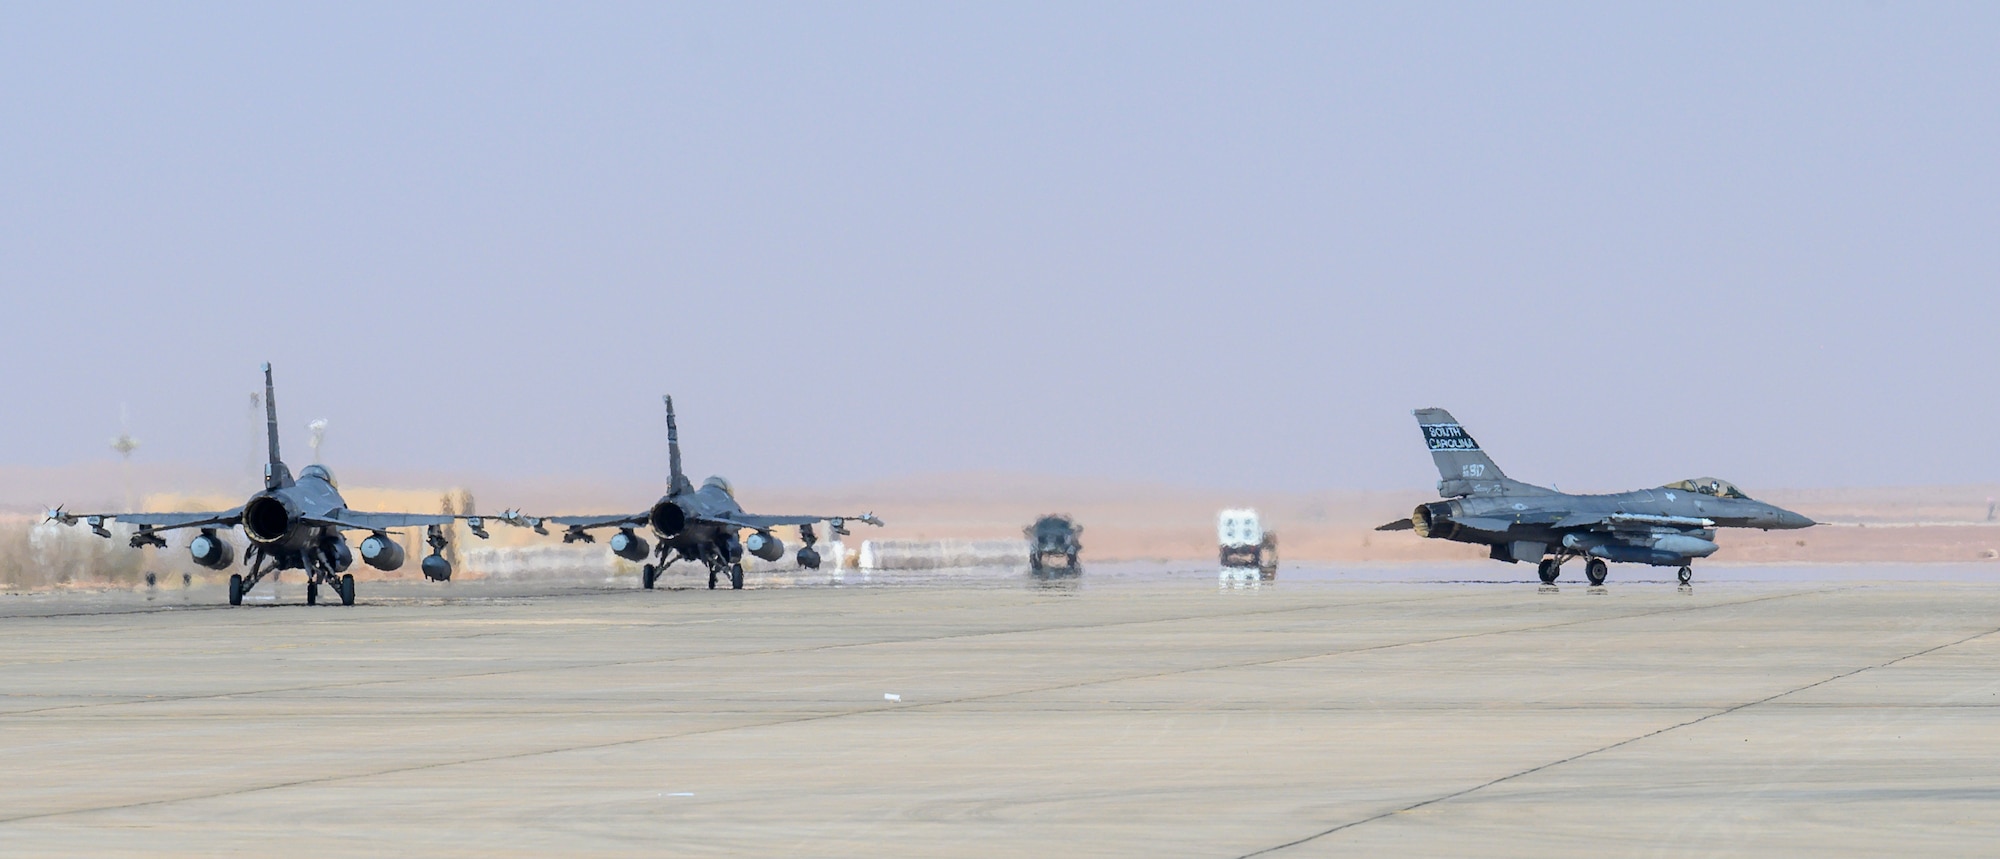 A contingent of U.S. Air Force F-16CJ Fighting Falcons from South Carolina Air National Guard’s 169th “Swamp Fox” Fighter Wing taxi on the flight line upon arrival at Prince Sultan Air Base, Kingdom of Saudi Arabia, April 14, 2021. The Swamp Fox team has been deployed to PSAB to help bolster the defensive capabilities against potential threats in the region. (U.S. Air Force Photo by Senior Airman Samuel Earick)